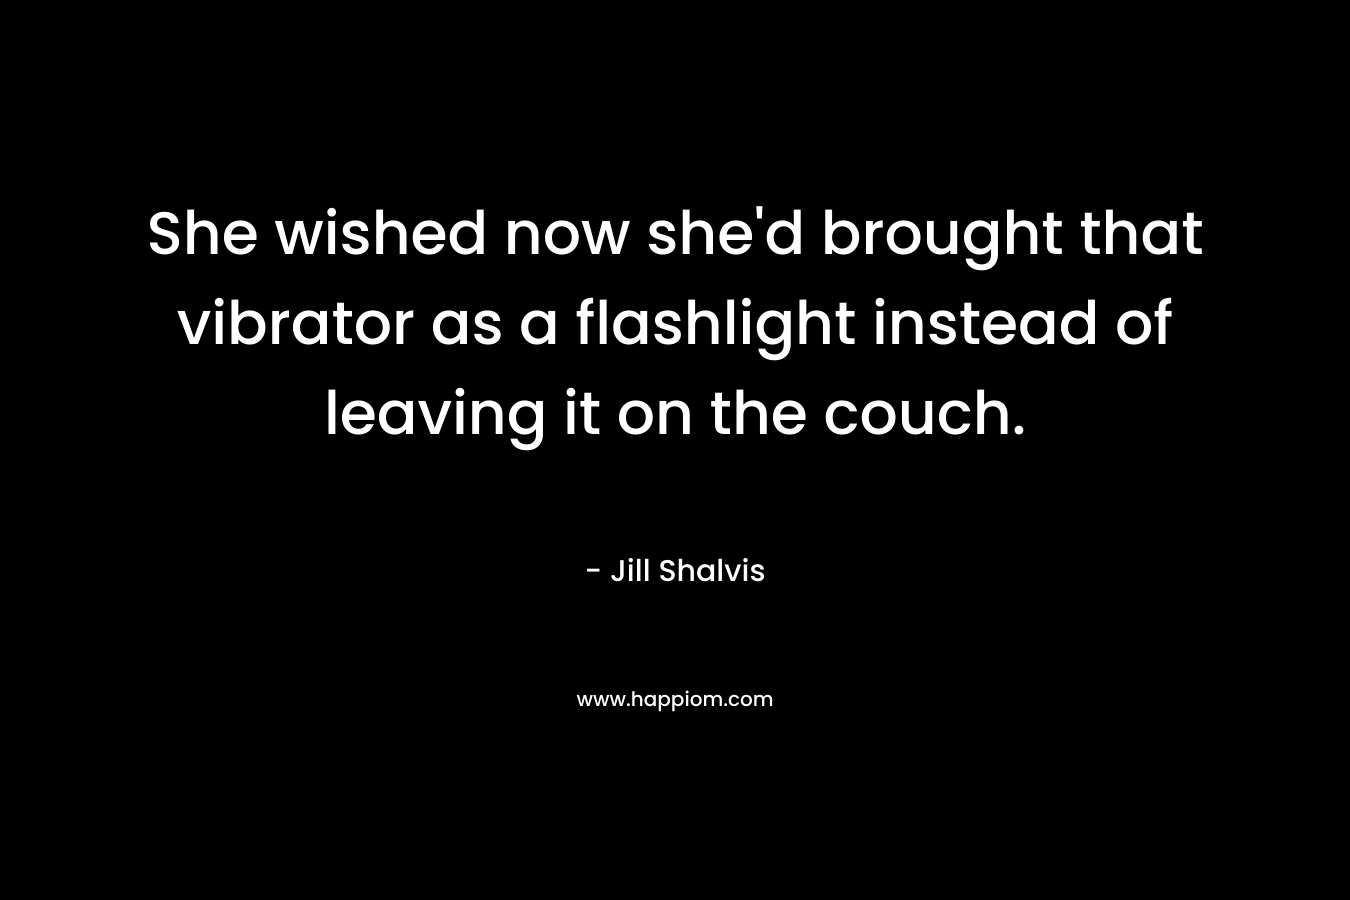 She wished now she'd brought that vibrator as a flashlight instead of leaving it on the couch.